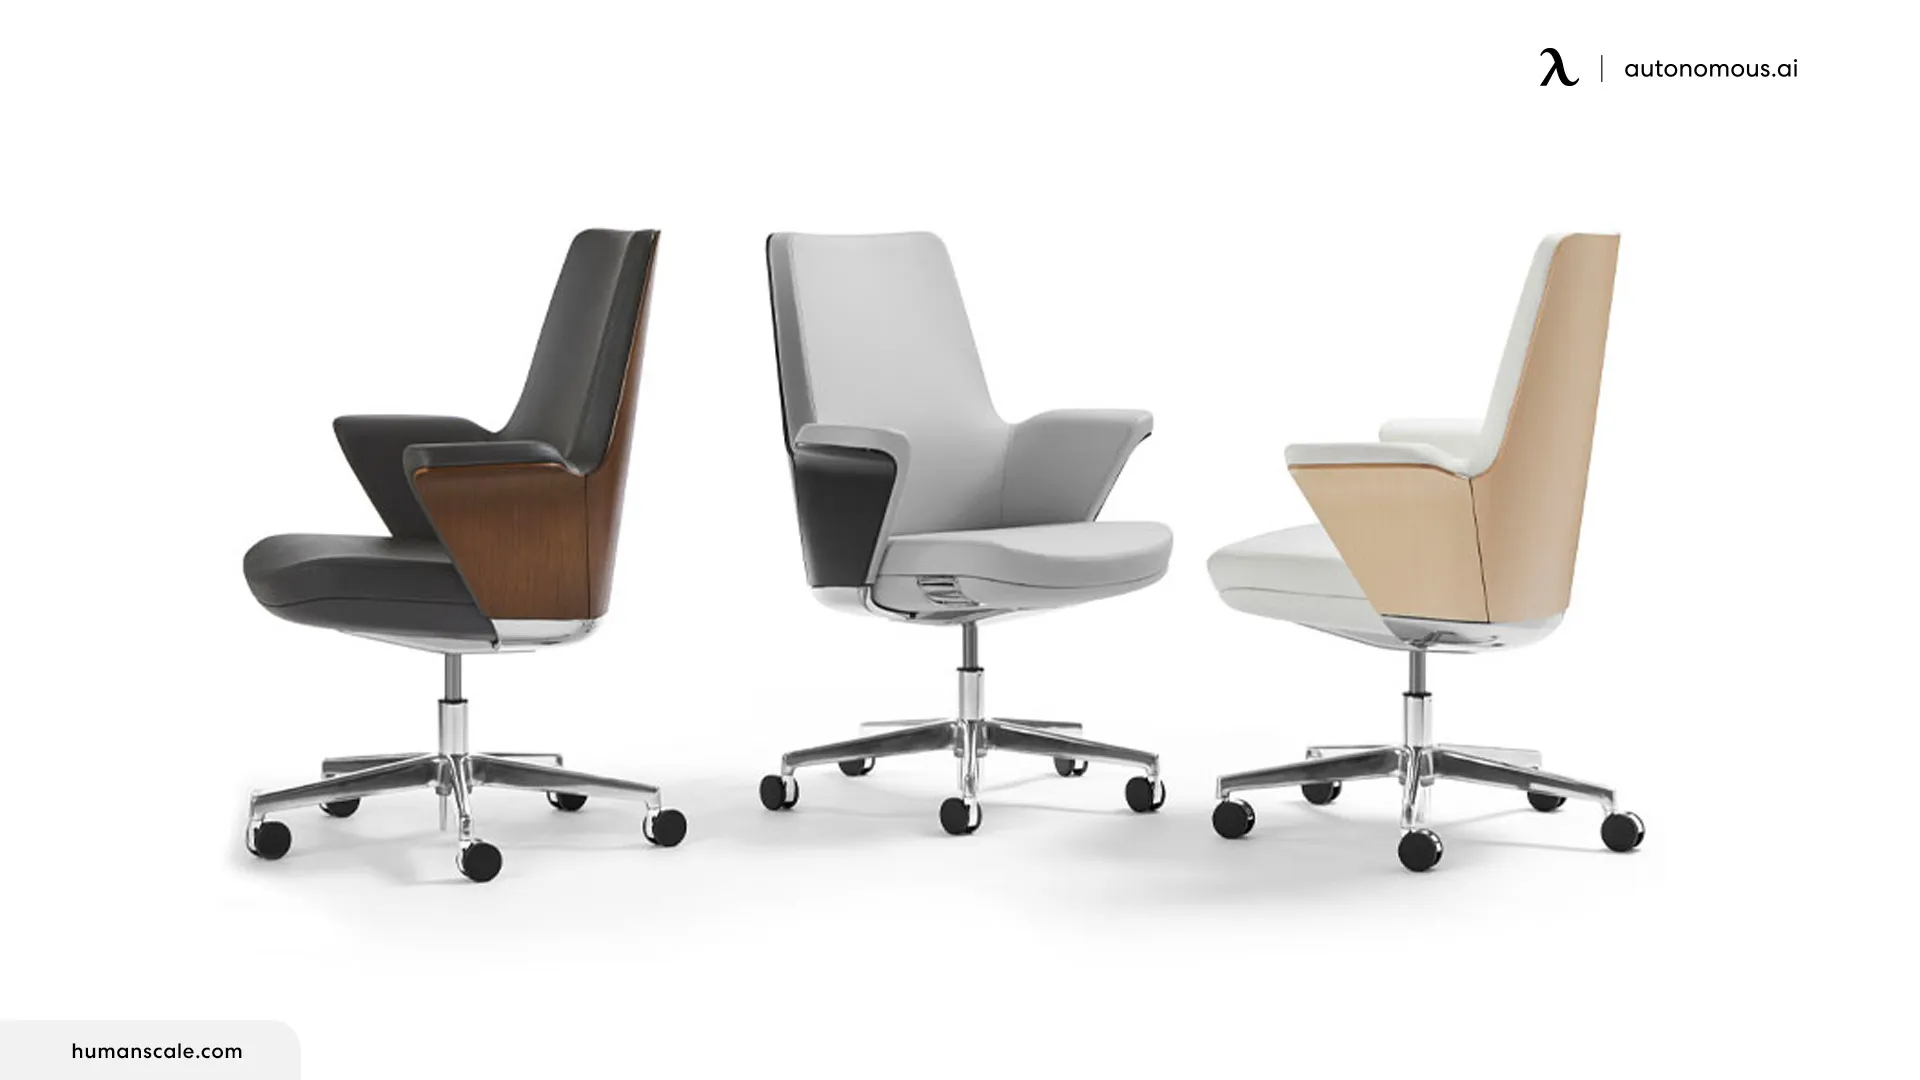 Common Mistakes People Make When Choosing the Width of Their Desk Chair